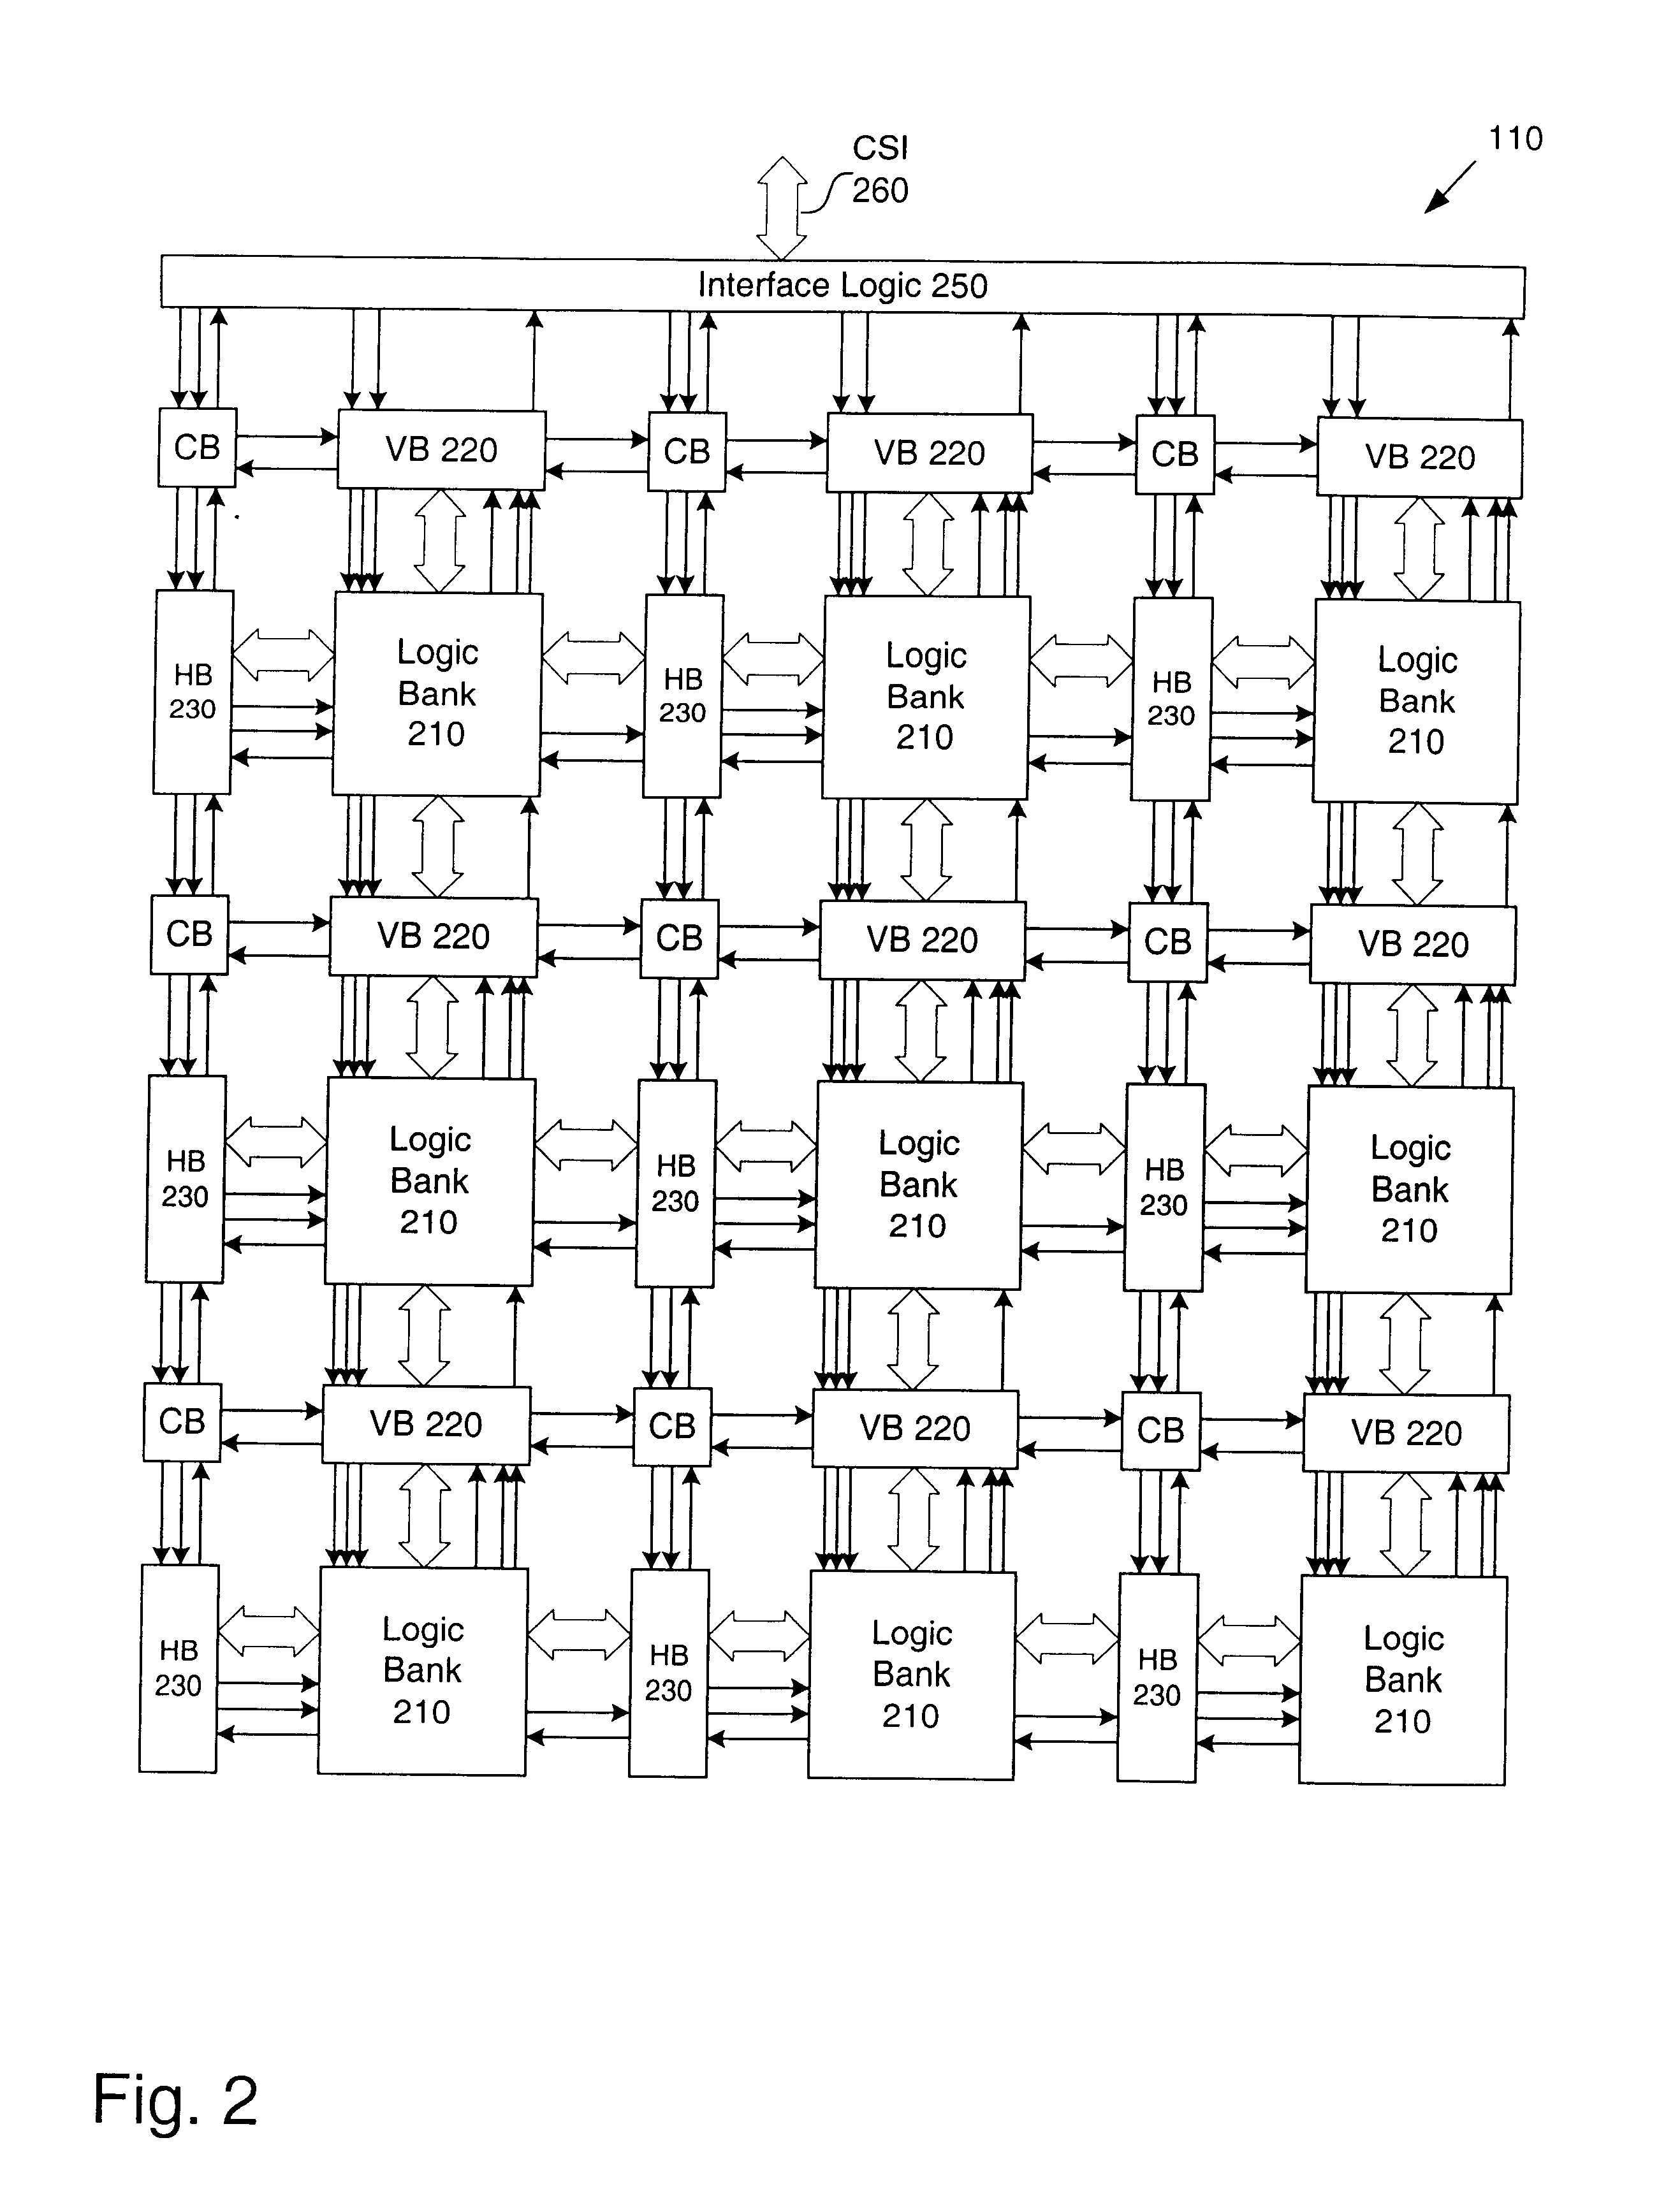 Method and apparatus to facilitate self-testing of a system on a chip